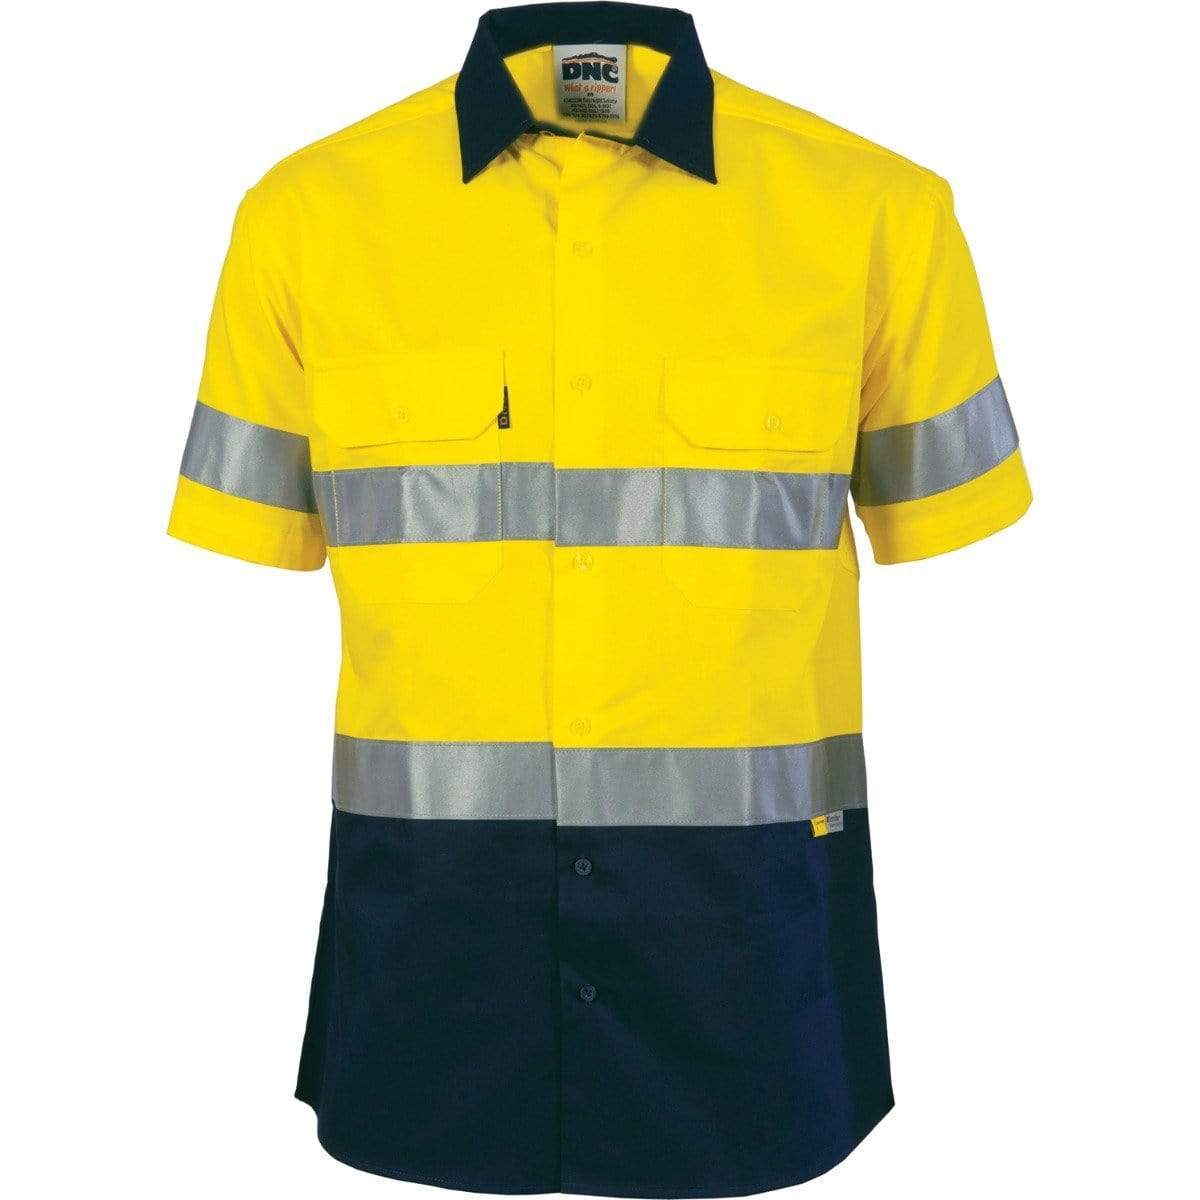 Dnc Workwear Hi-vis Two-tone Short Sleeve Drill Shirt With 3m 8906 R/tape - 3833 Work Wear DNC Workwear Yellow/Navy S 